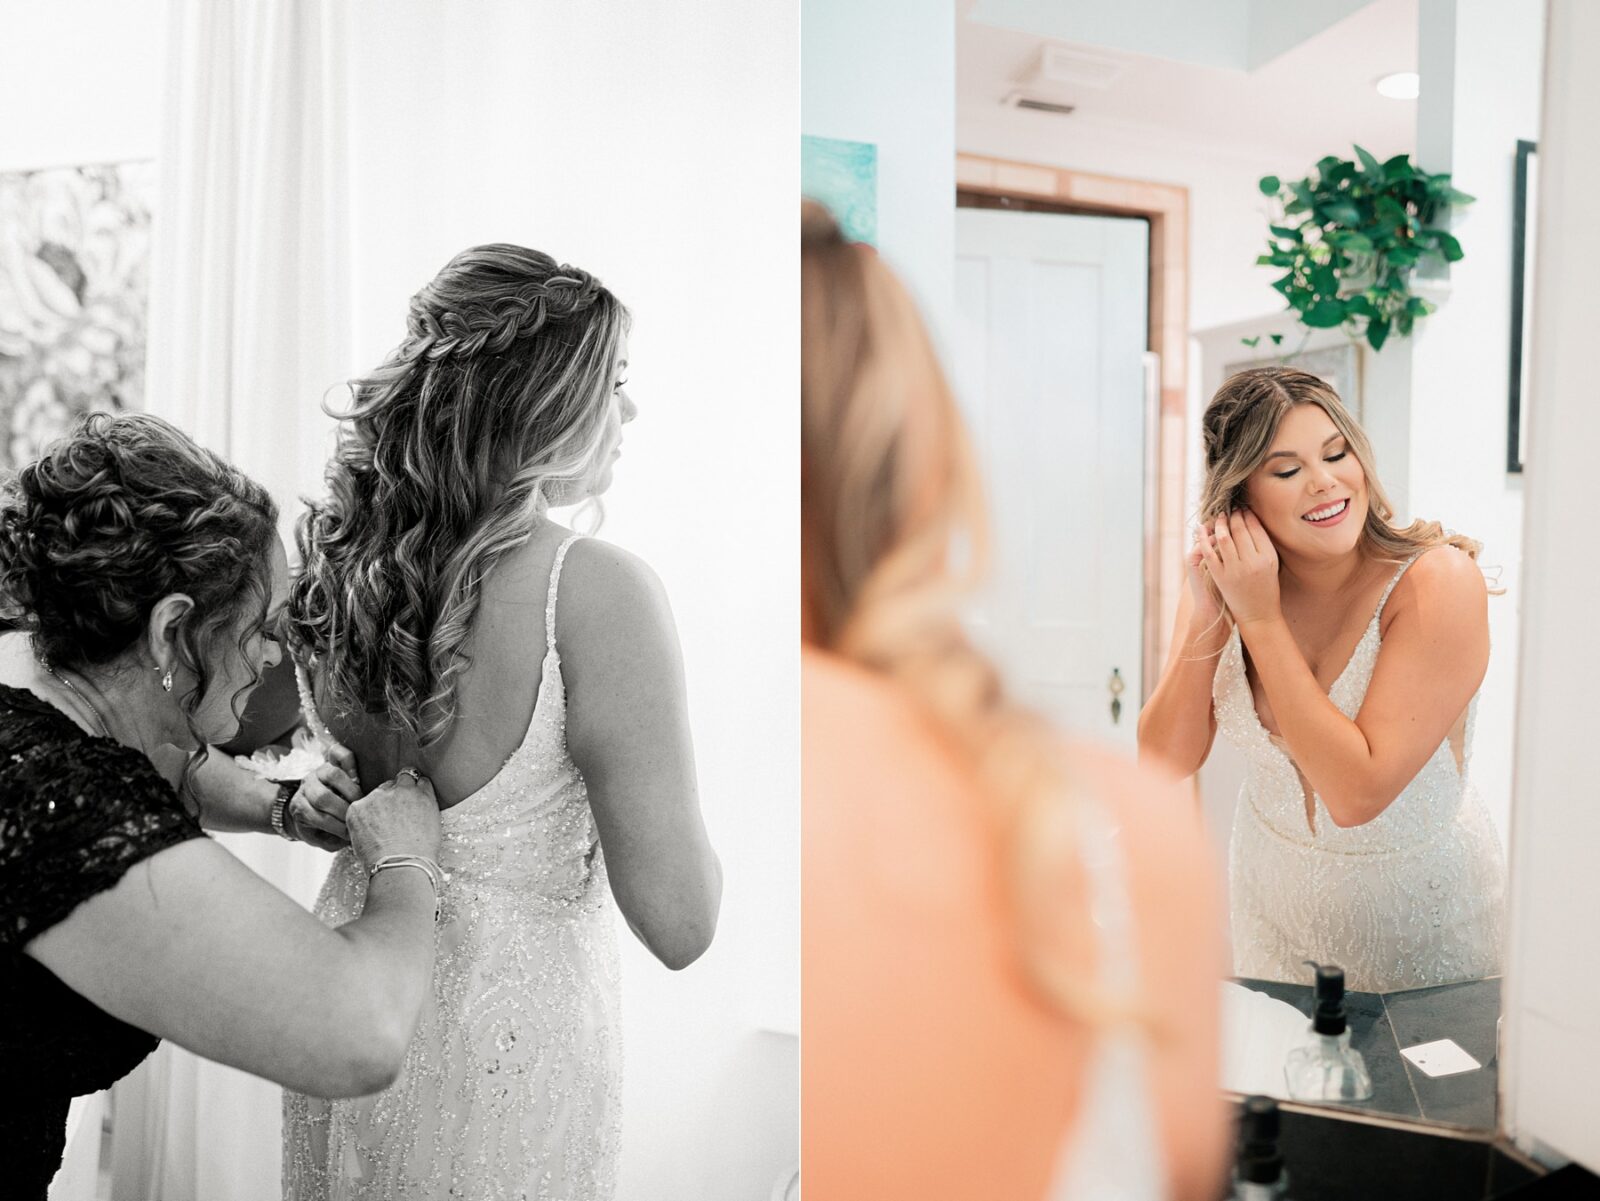 bride getting ready in bathroom with mom for wedding photography at hummingbird house in austin, tx